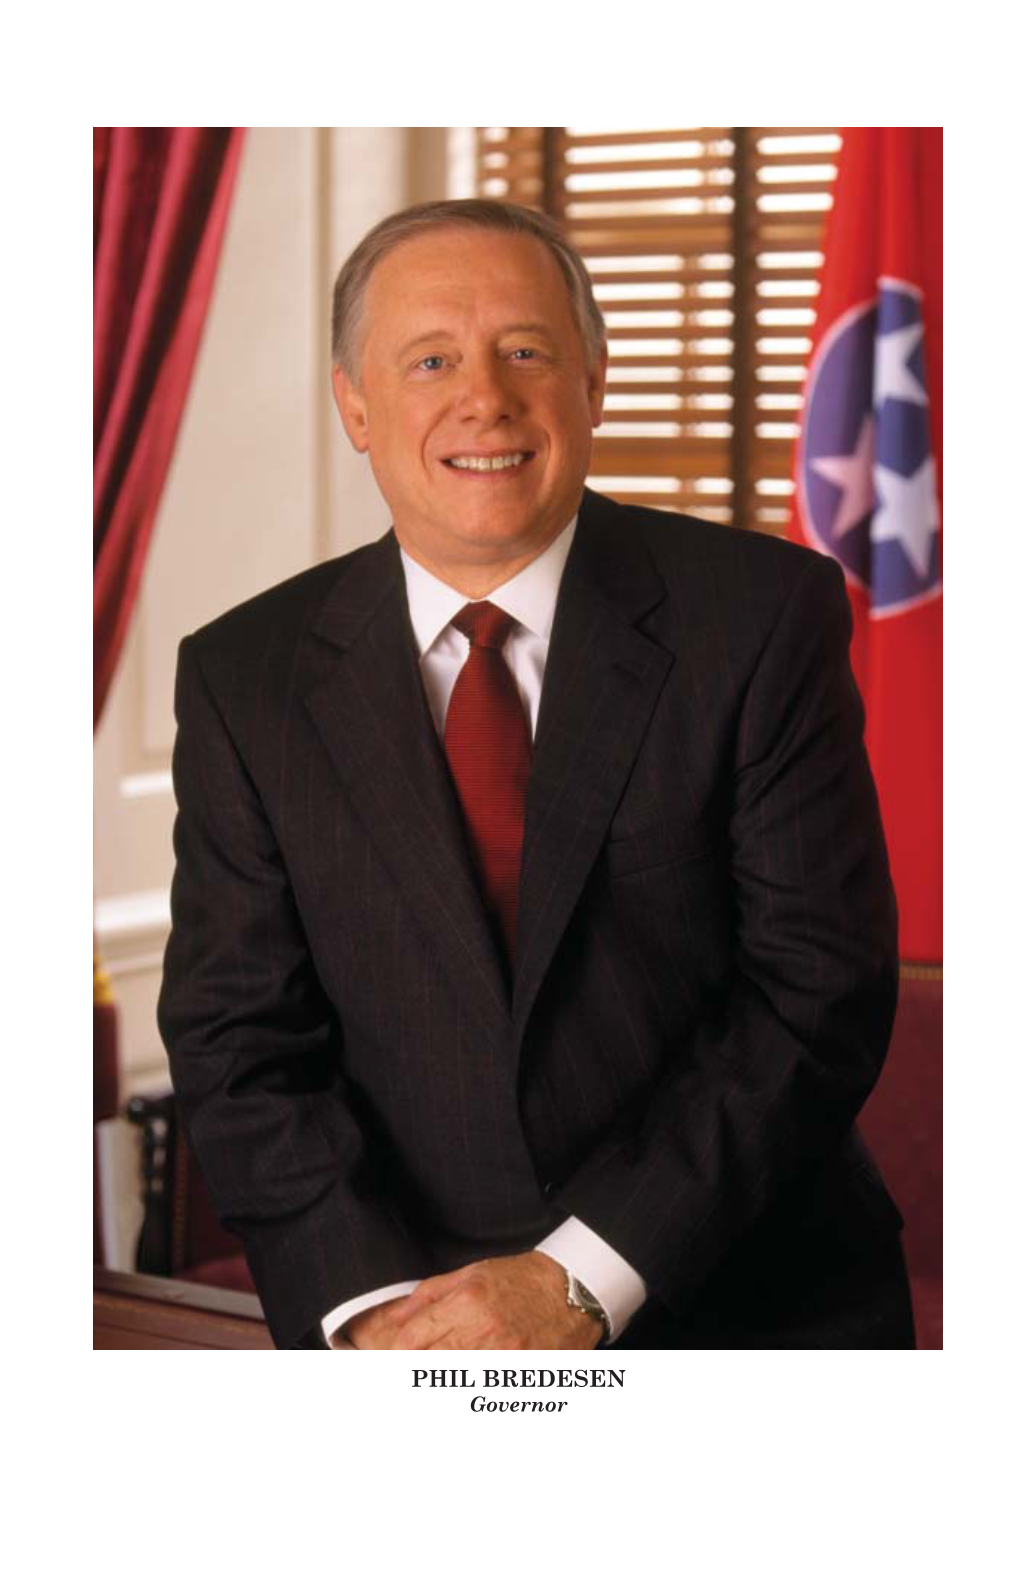 PHIL BREDESEN Governor OFFICE of the GOVERNOR State Capitol Nashville, TN 37243-0001 (615) 741-2001 Tennessee.Gov/Governor